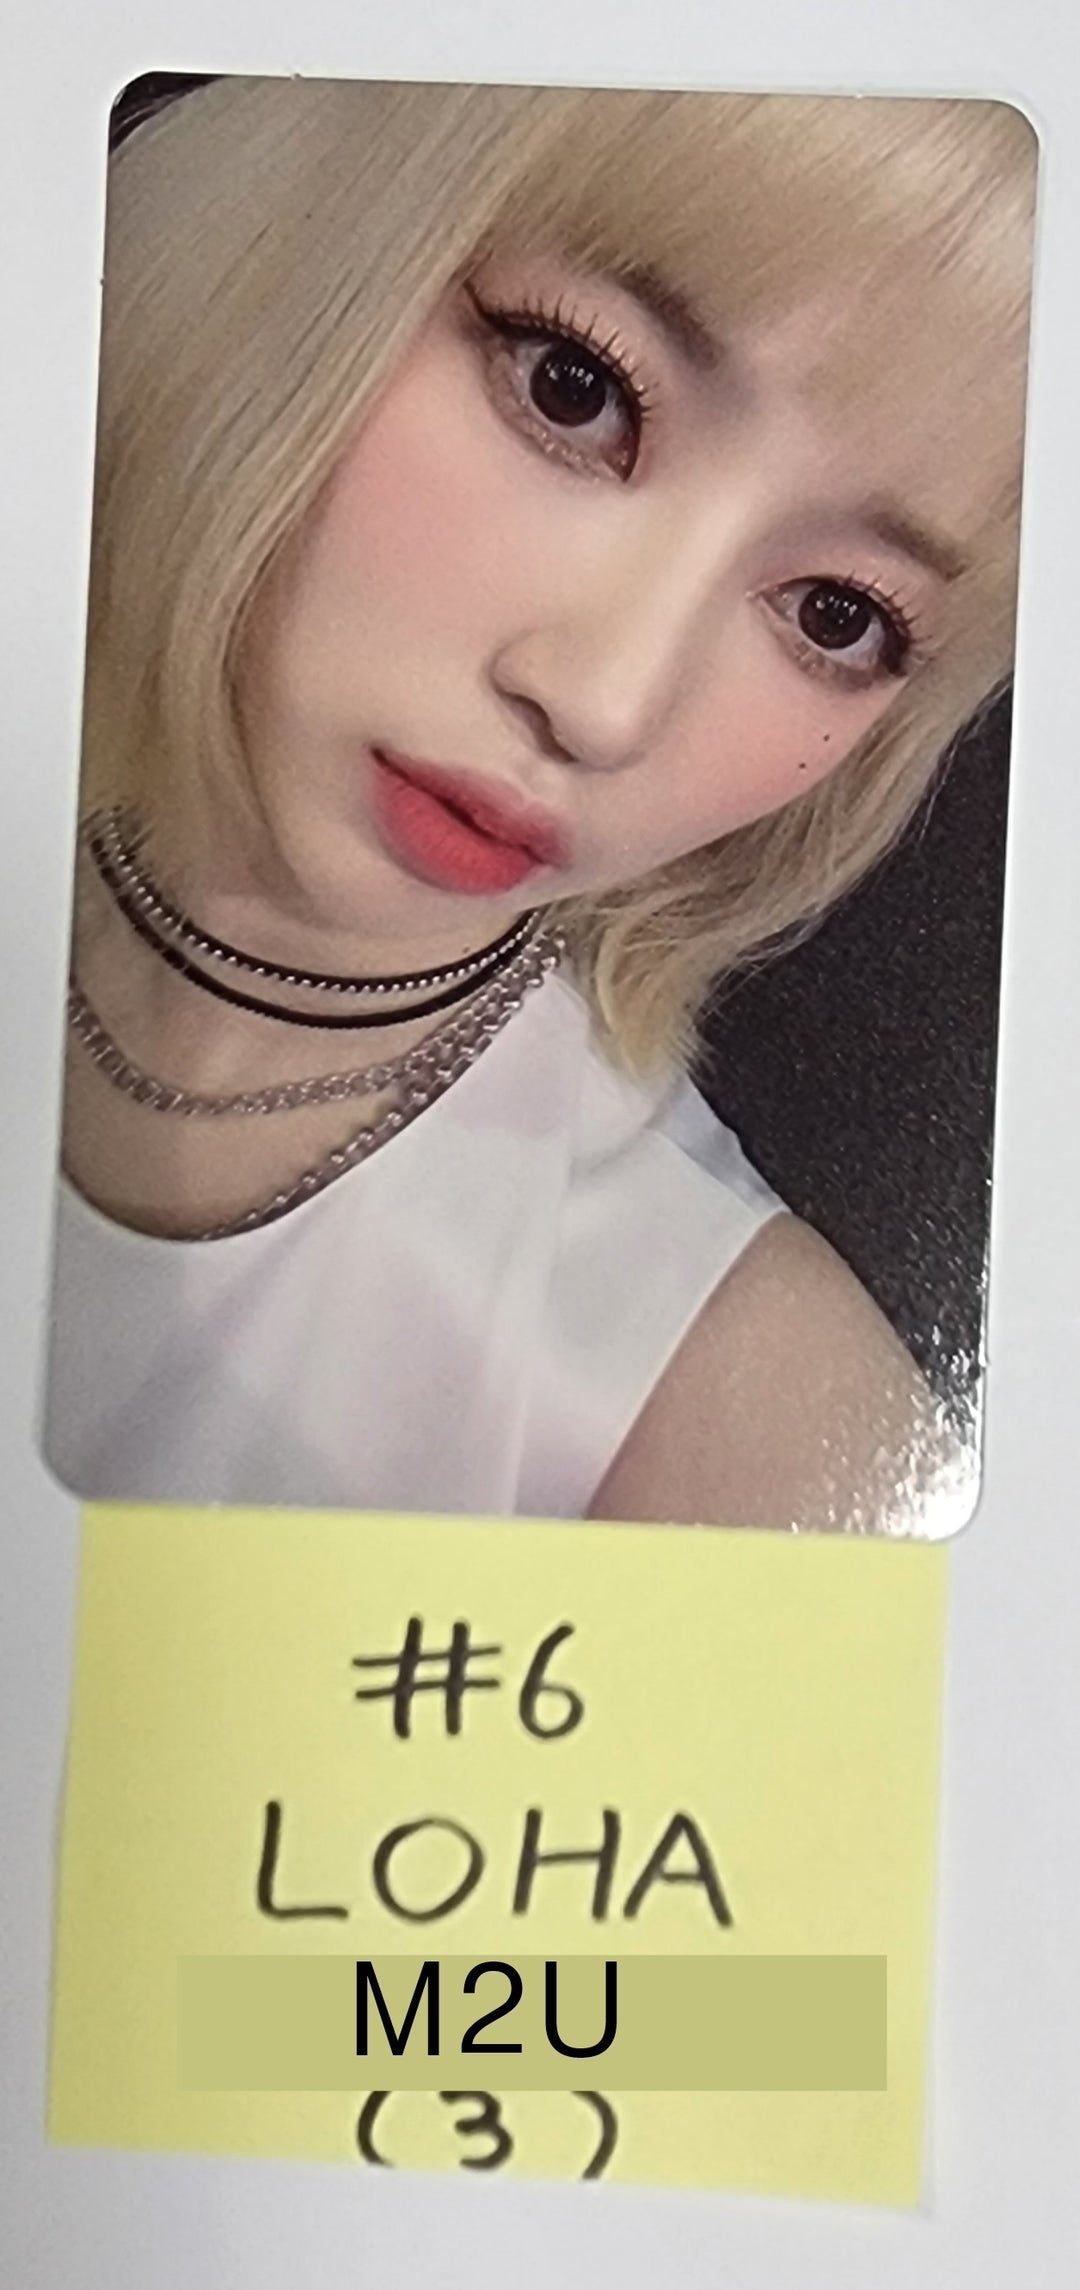 NATURE "NATURE WORLD : CODE W" - M2U Fansign Event Photocard